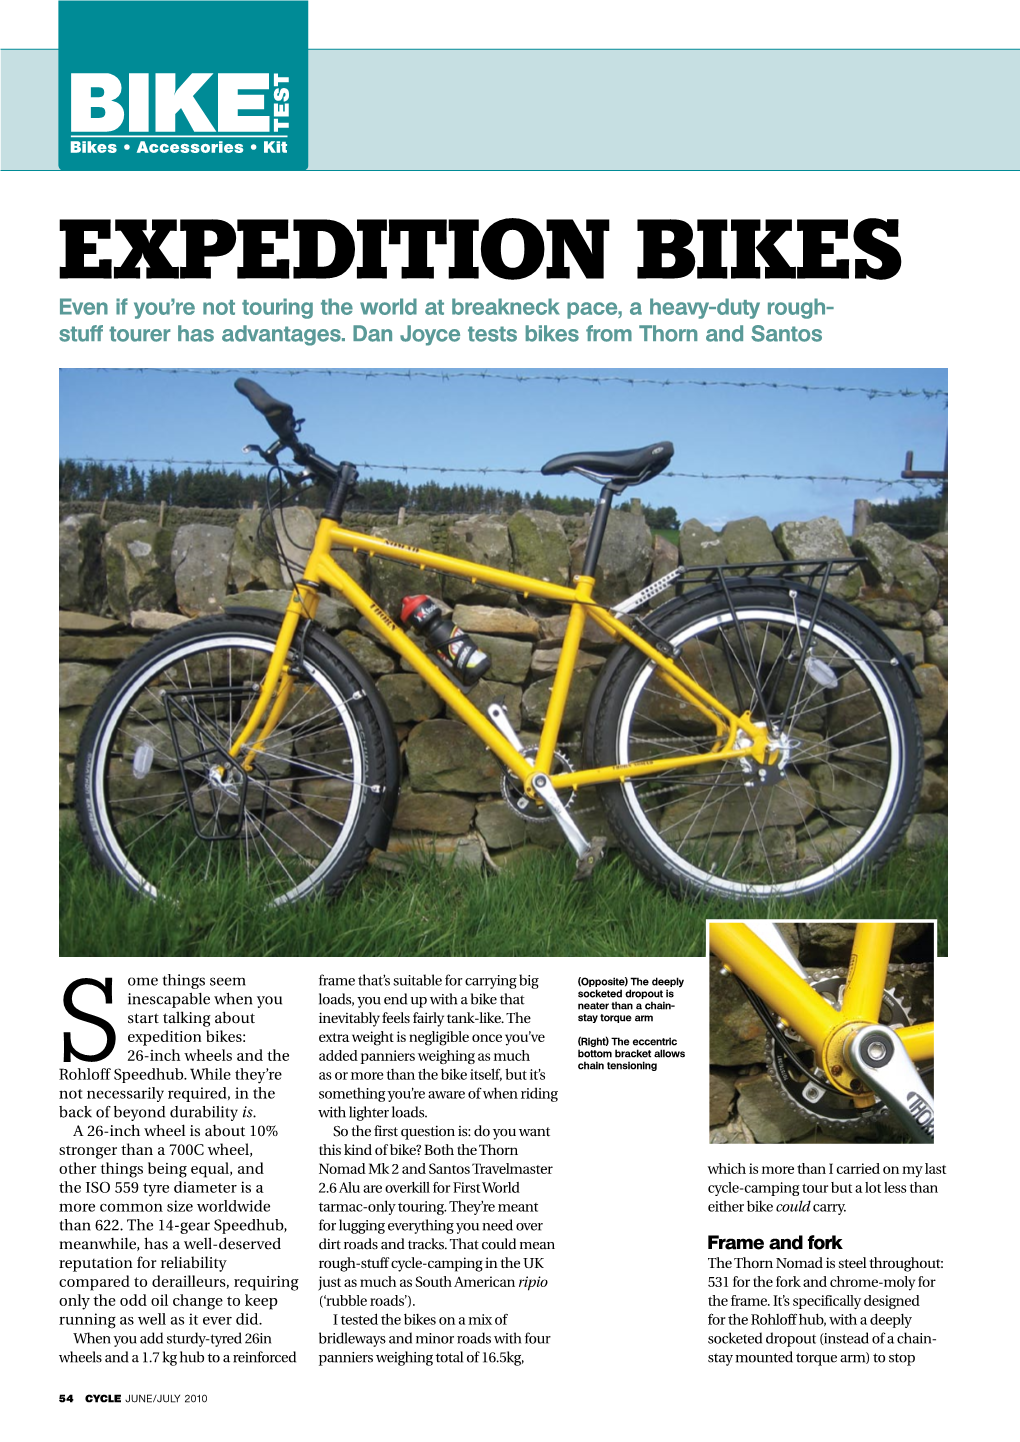 Expedition Bikes Even If You’Re Not Touring the World at Breakneck Pace, a Heavy-Duty Rough- Stuff Tourer Has Advantages